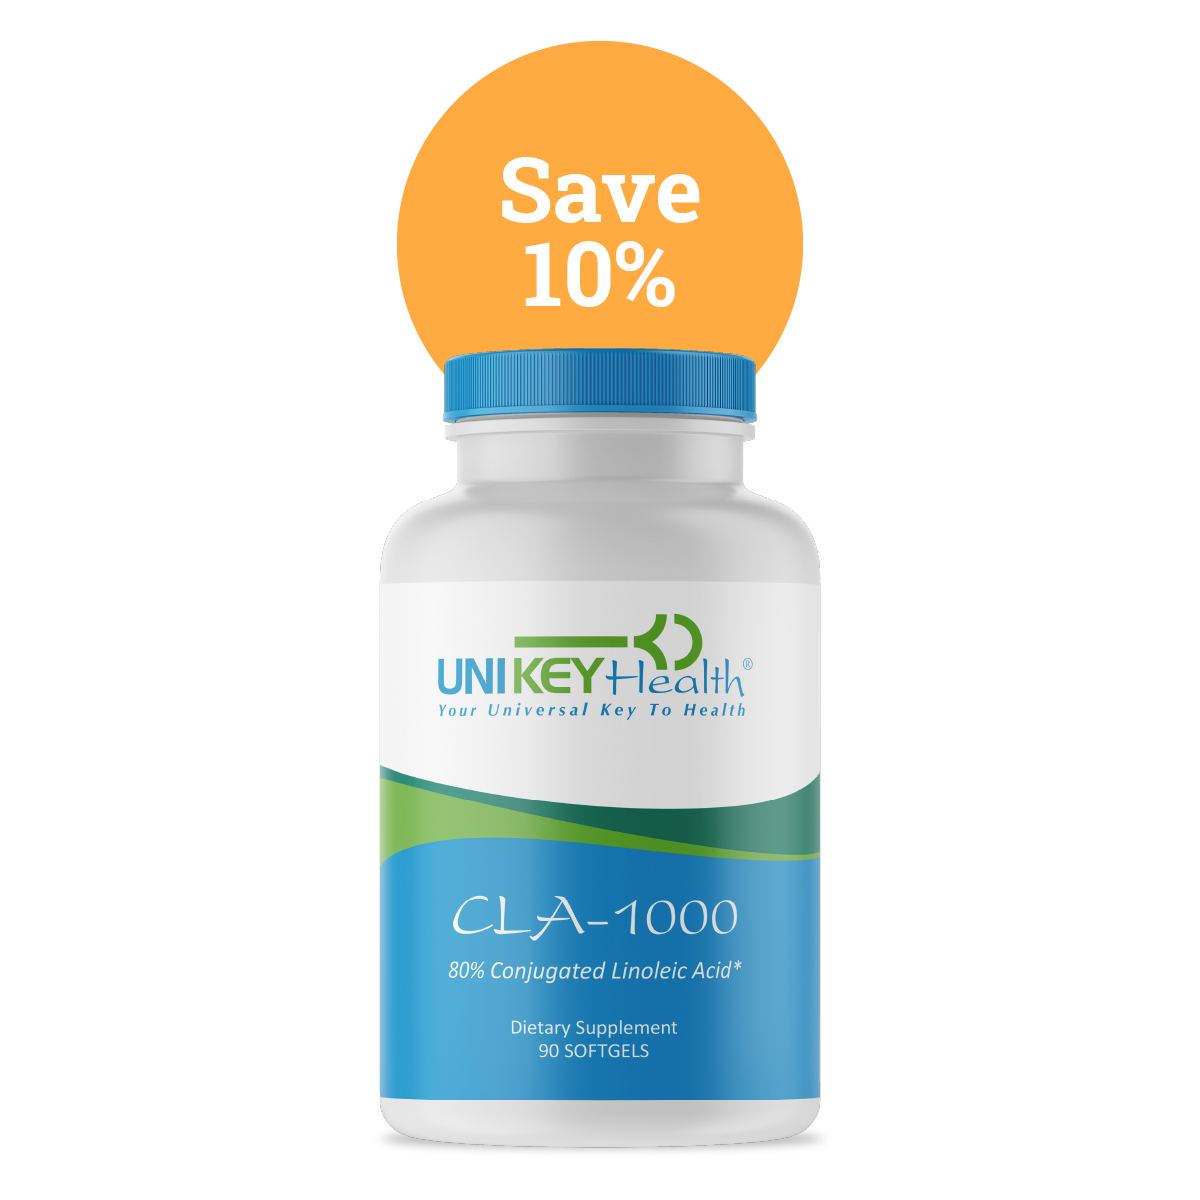 Buy 1 CLA-1000 to save 10%